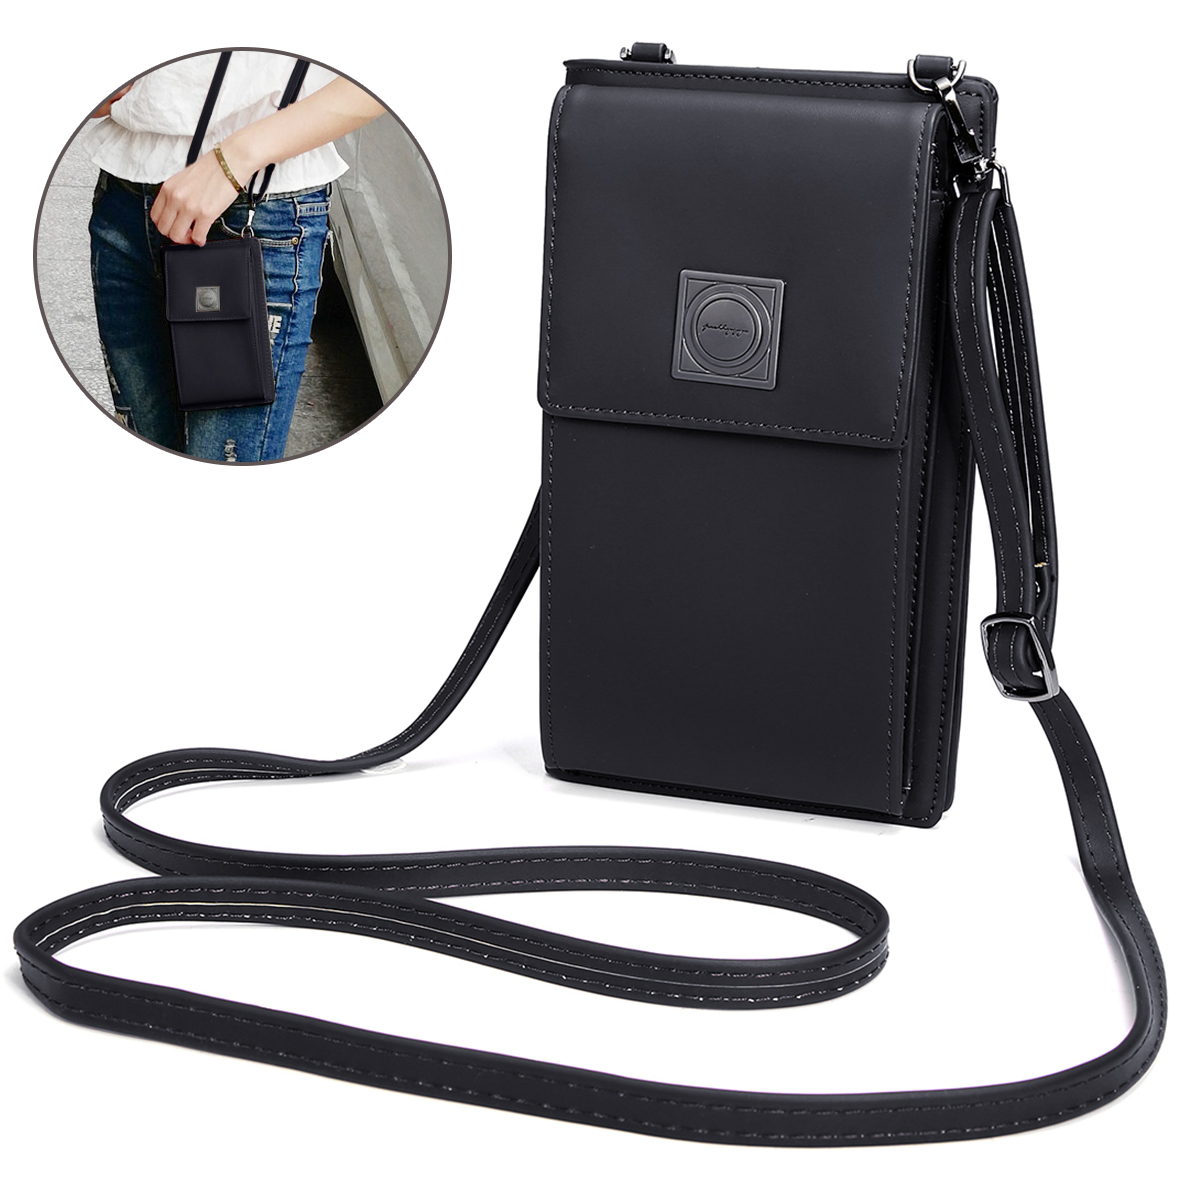 Fashion-Folding-with-Multi-Card-Slots-PU-Leather-Wallet-Purse-Mobile-Phone-Storage-Shoulder-Bag-1868718-2